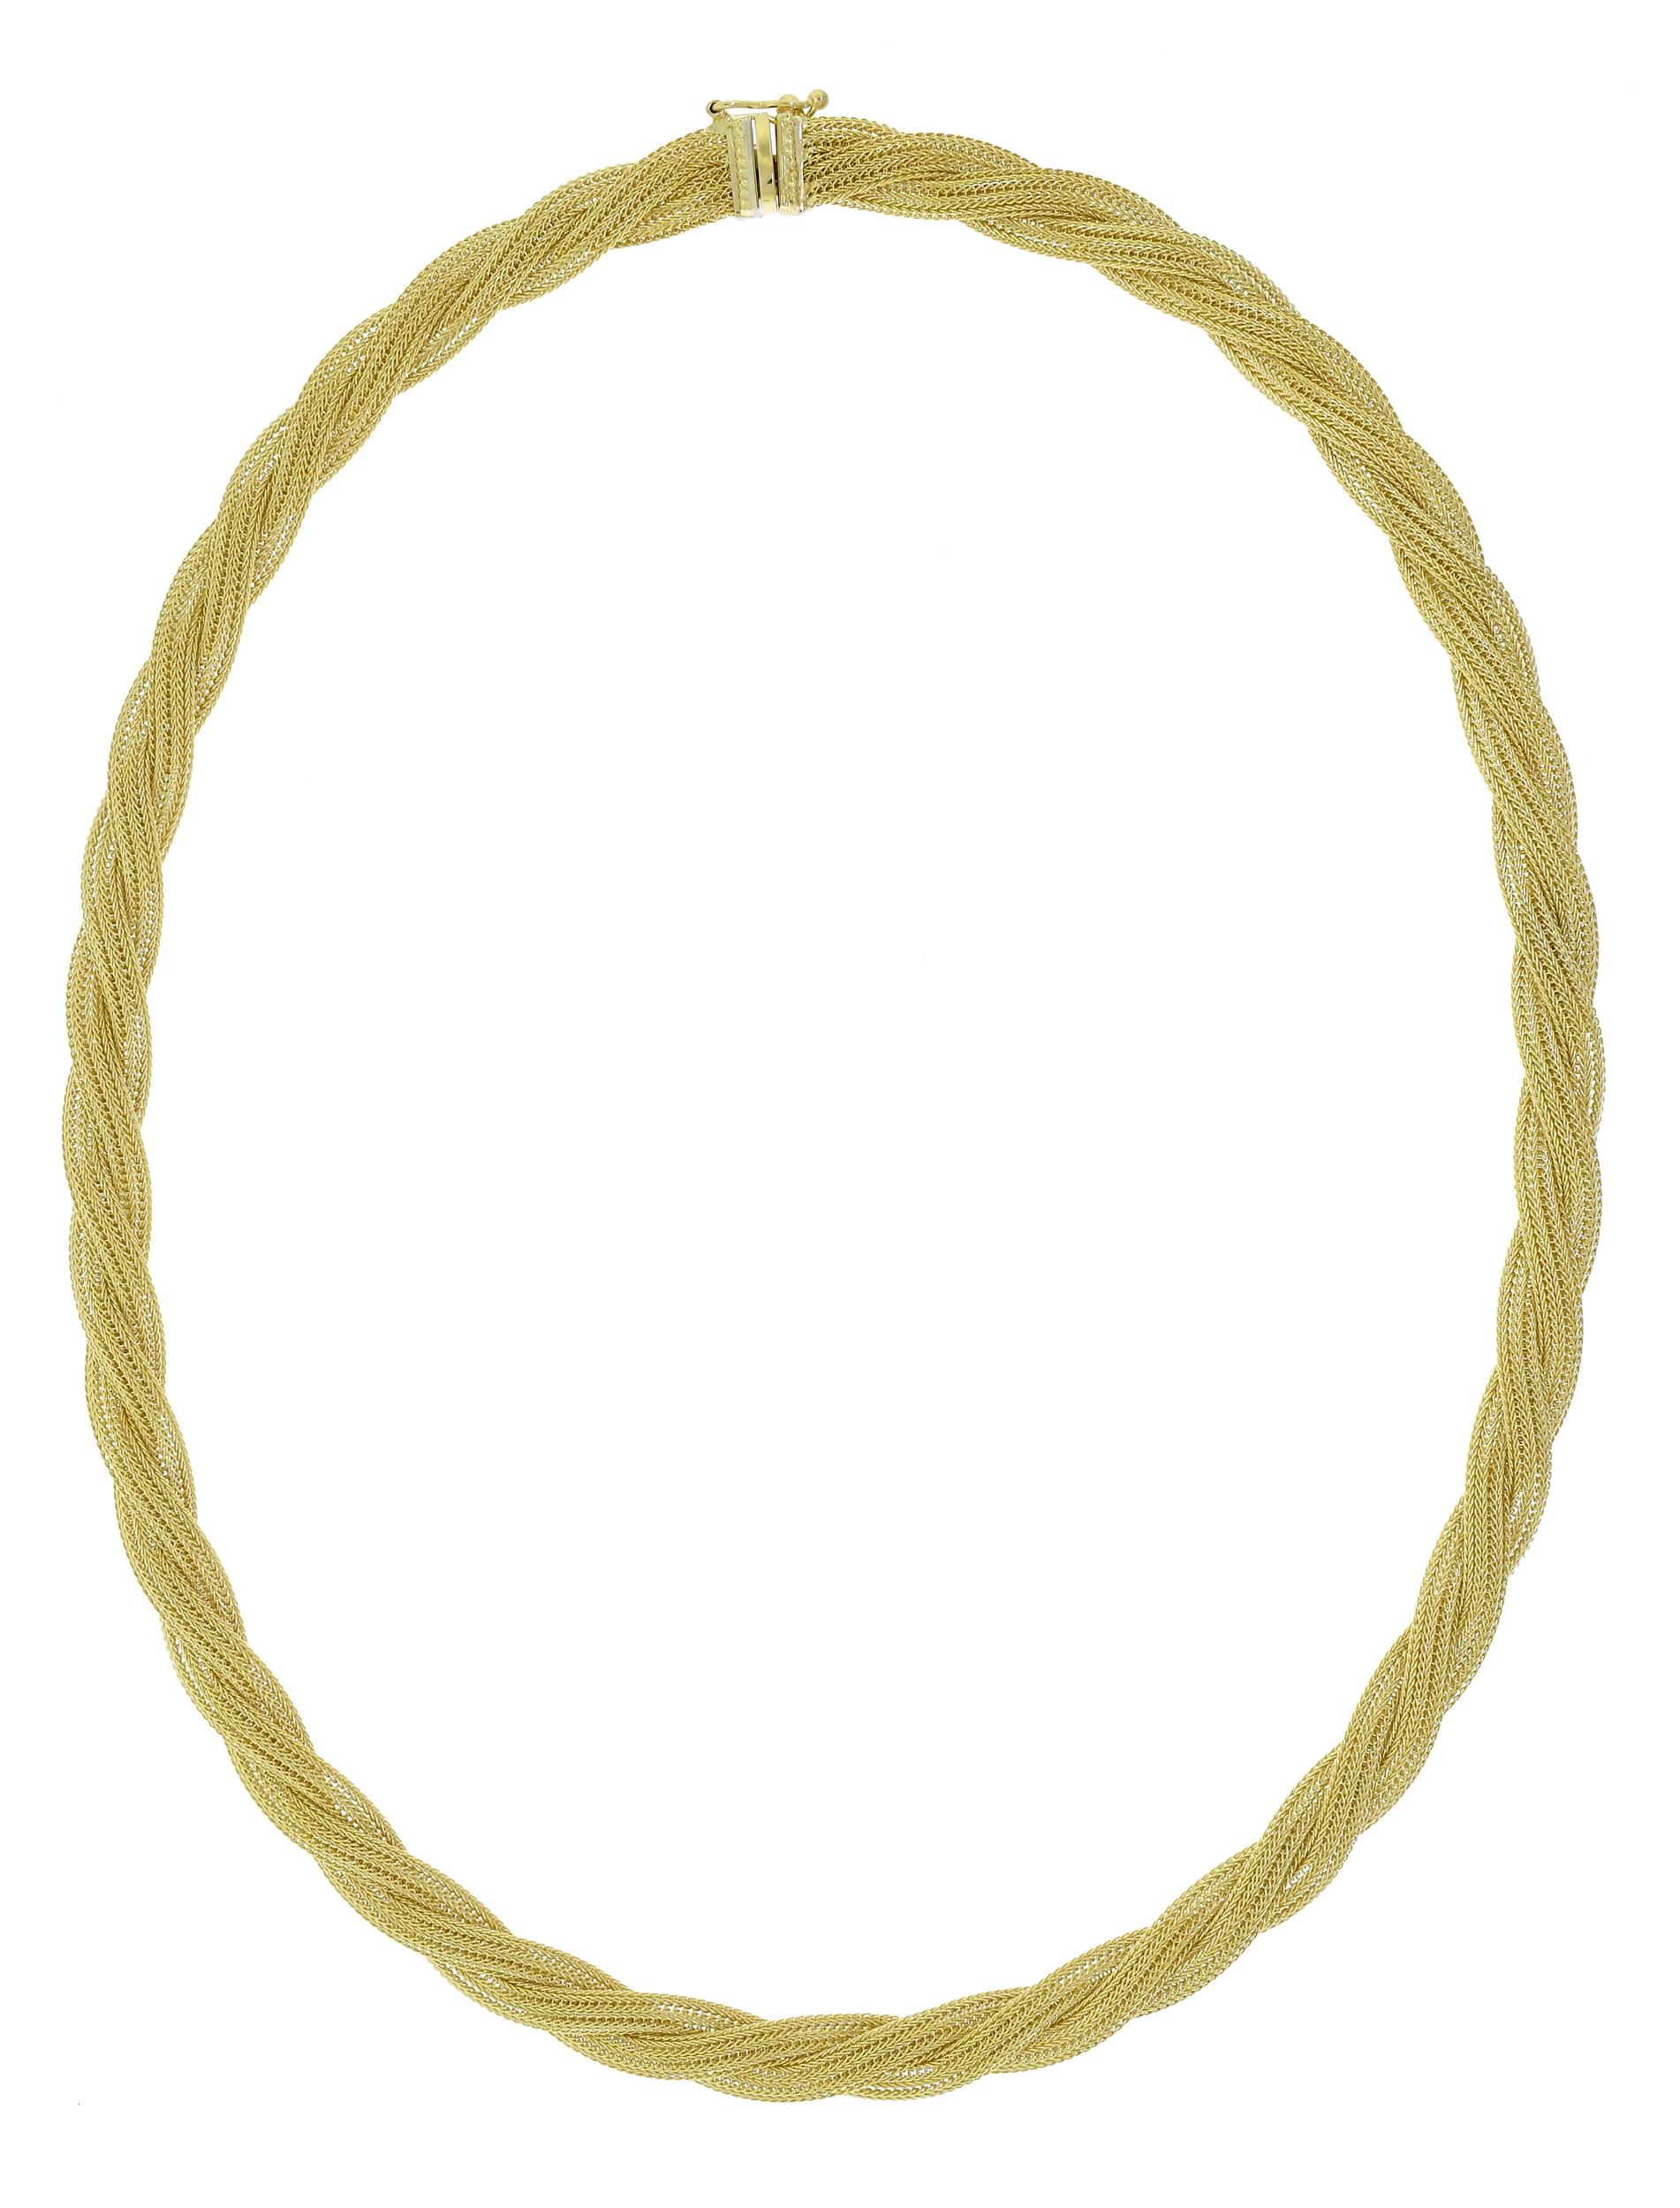 14K YELLOW GOLD WOVEN TWISTED NECKLACE  307734